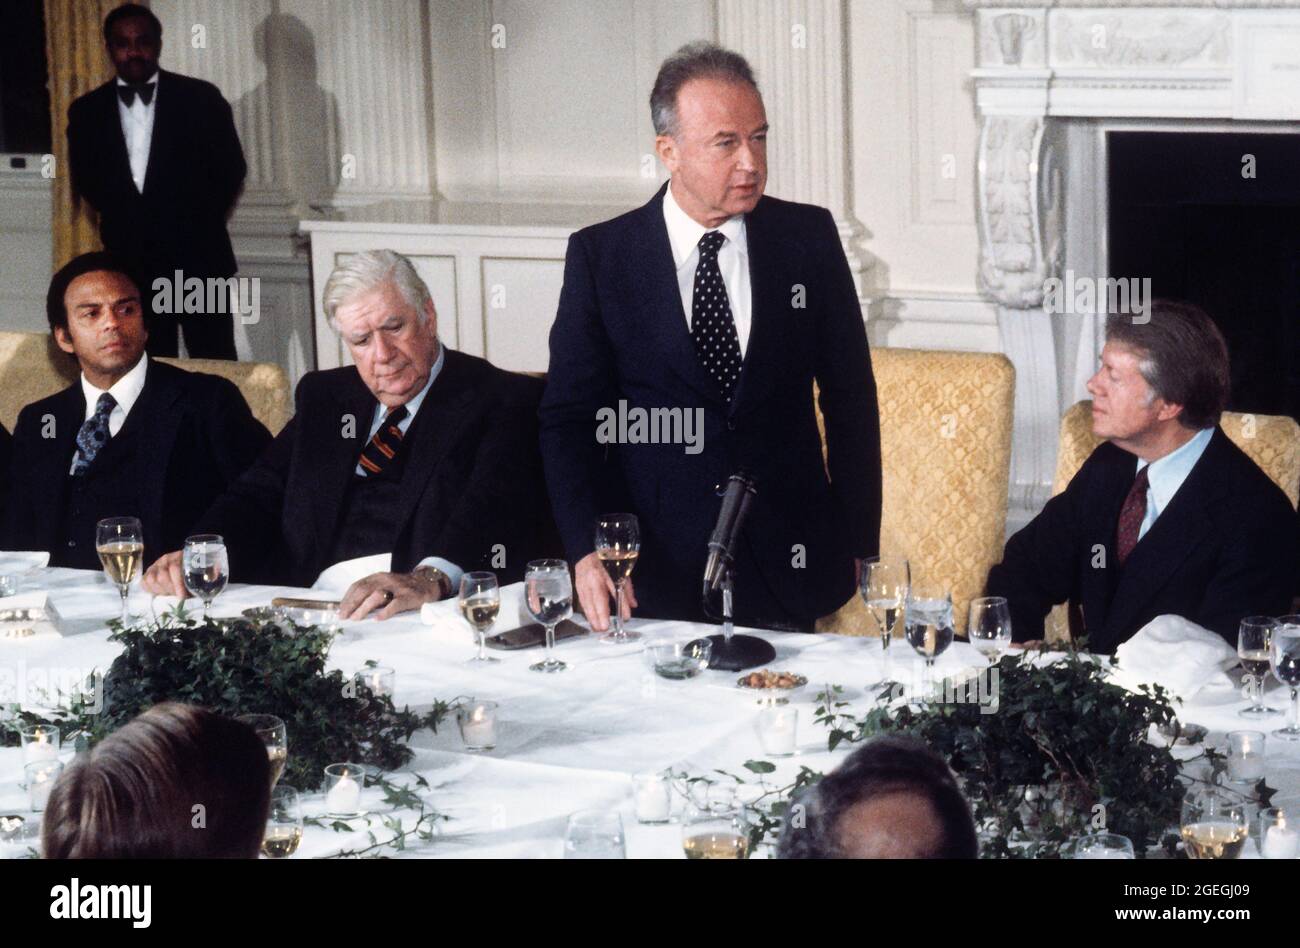 Prime Minister Yitzhak Rabin of Israel, right center, offers remarks at a working dinner in his honor hosted by United States President Jimmy Carter, right, in the State Dining Room of the White House in Washington, DC on Monday, March 7, 1977. Looking on is Speaker of the US House of Representatives Tip O'Neill (Democrat of Massachusetts), left center, and US Ambassador to the United Nations Andrew Young.Credit: Benjamin E. 'Gene' Forte/CNP/Sipa USA Credit: Sipa USA/Alamy Live News Stock Photo